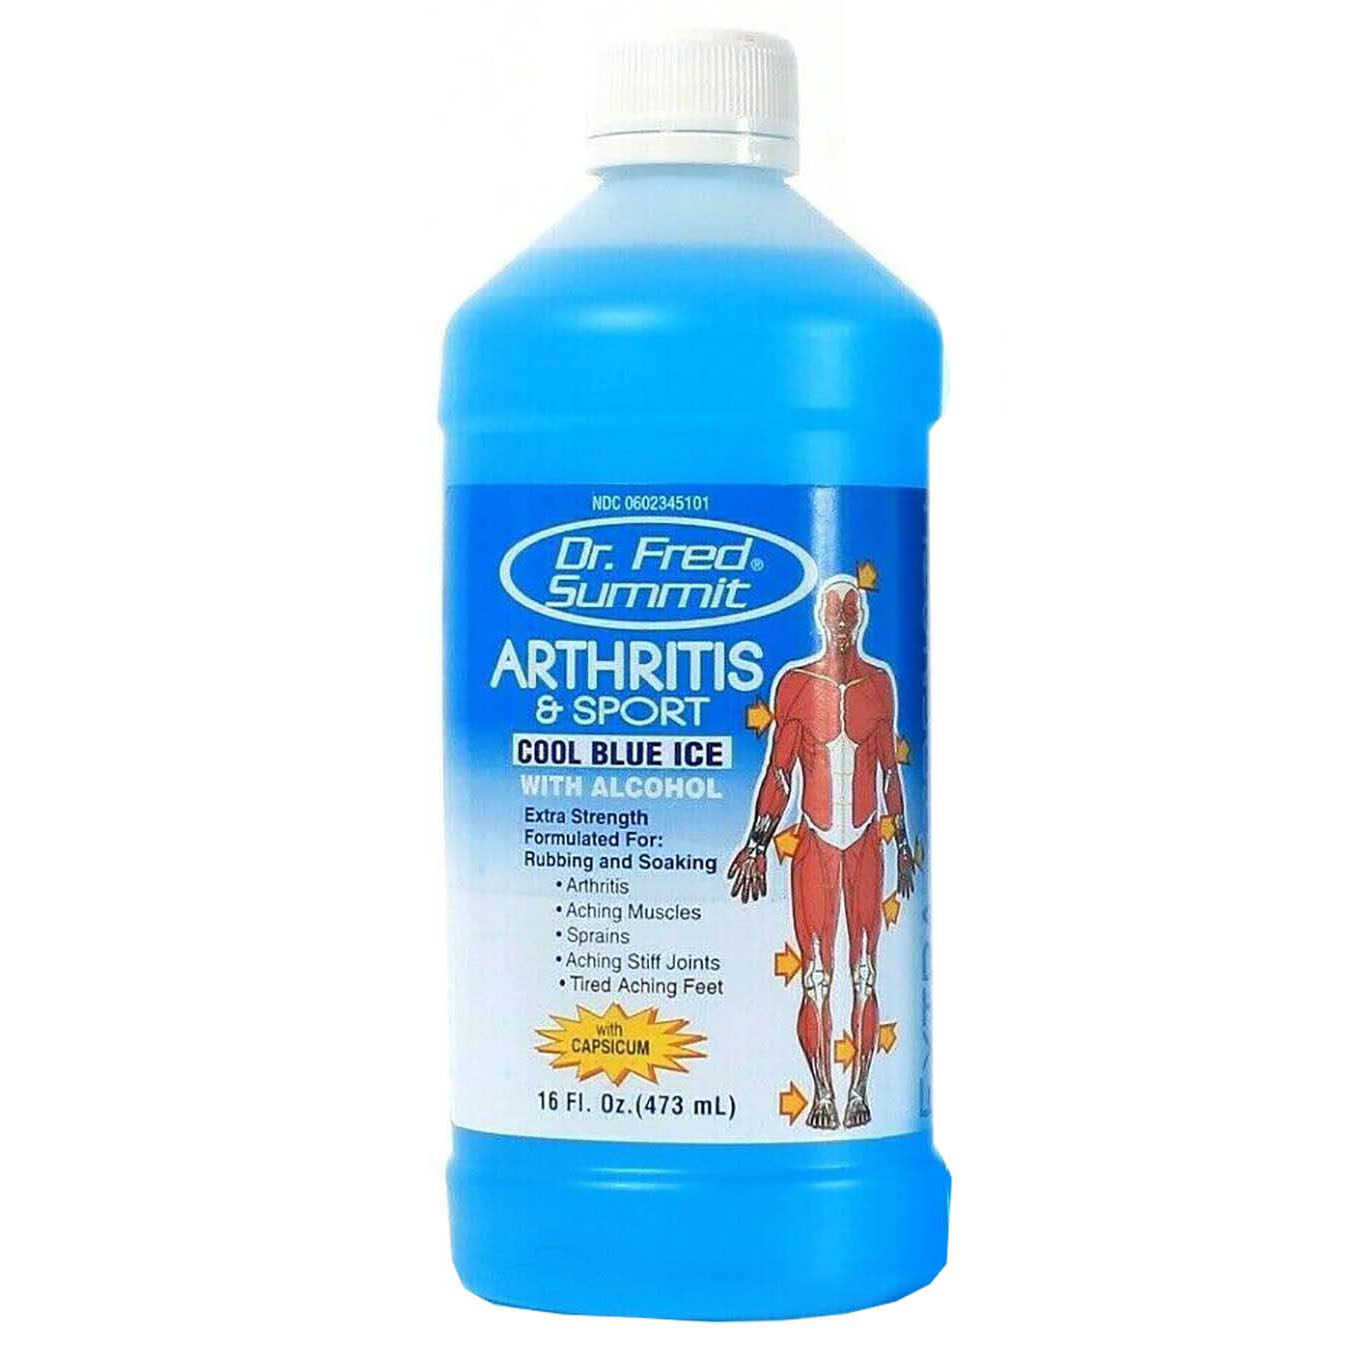 Dr. Fred Summit Arthritis & Sport Cool Blue Ice 16 oz. Front